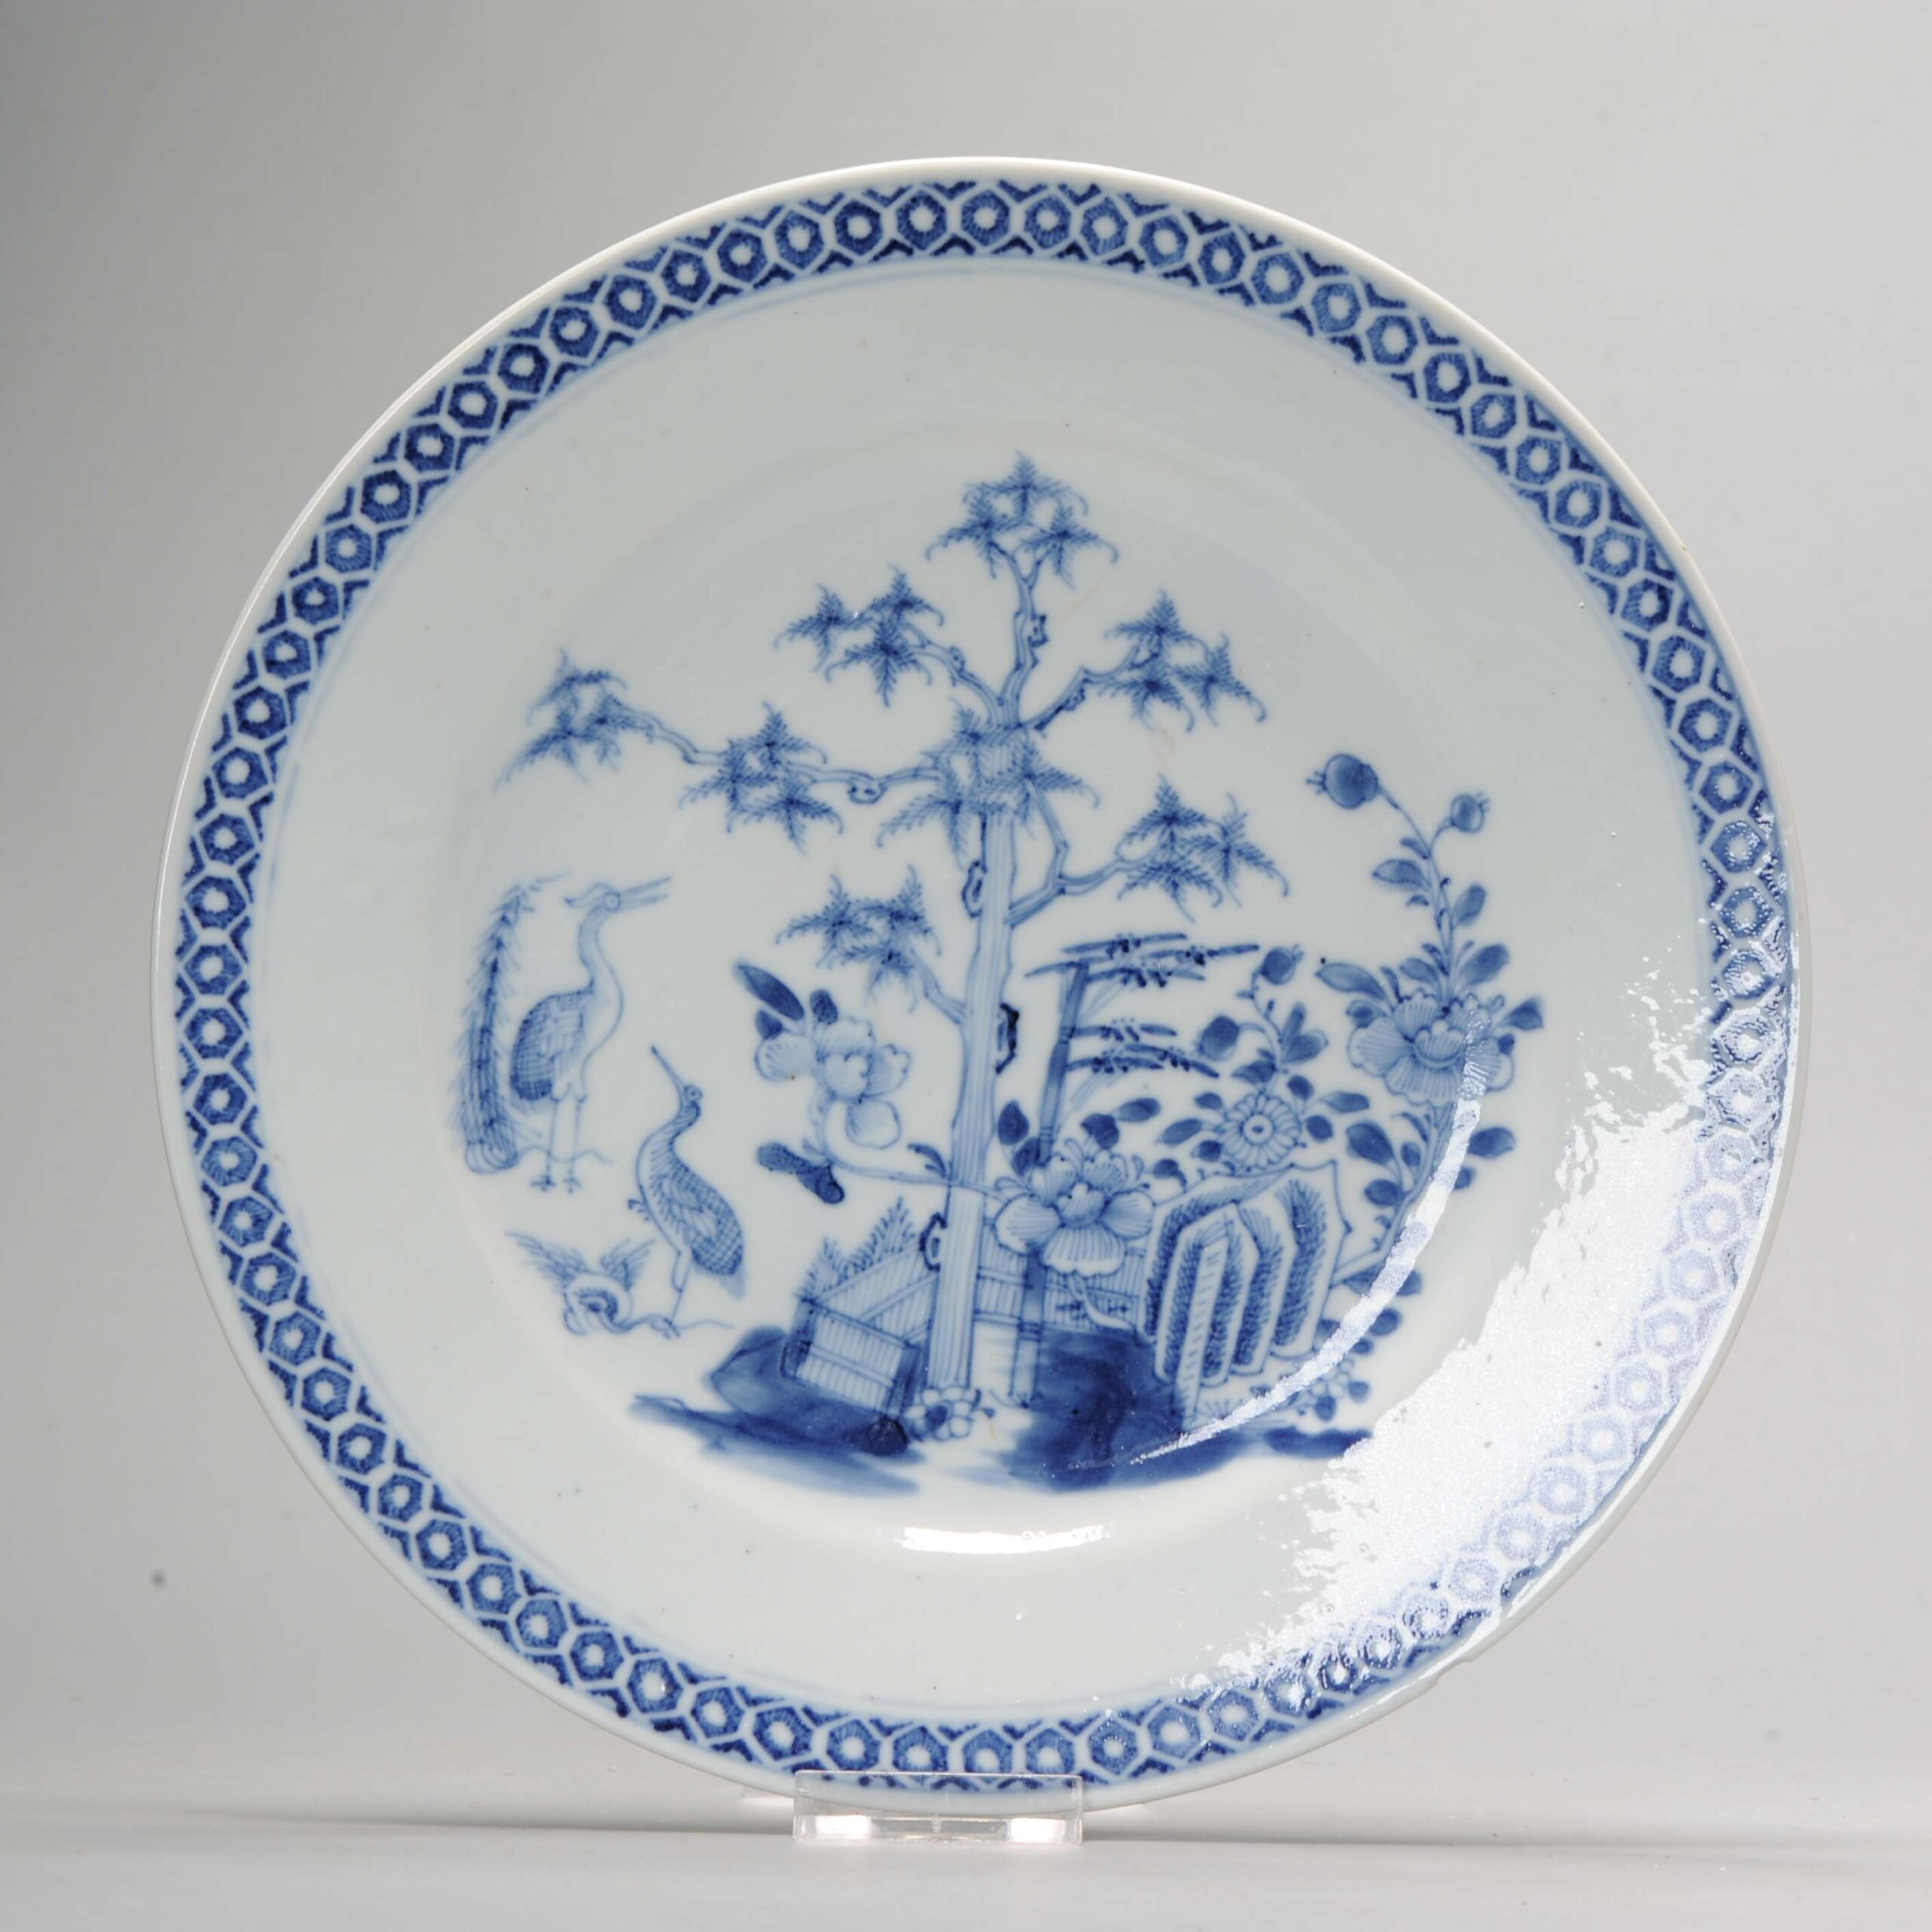 1088 Very nice plate with imperial quality on export porcelain. Beautiful blue color and excellent